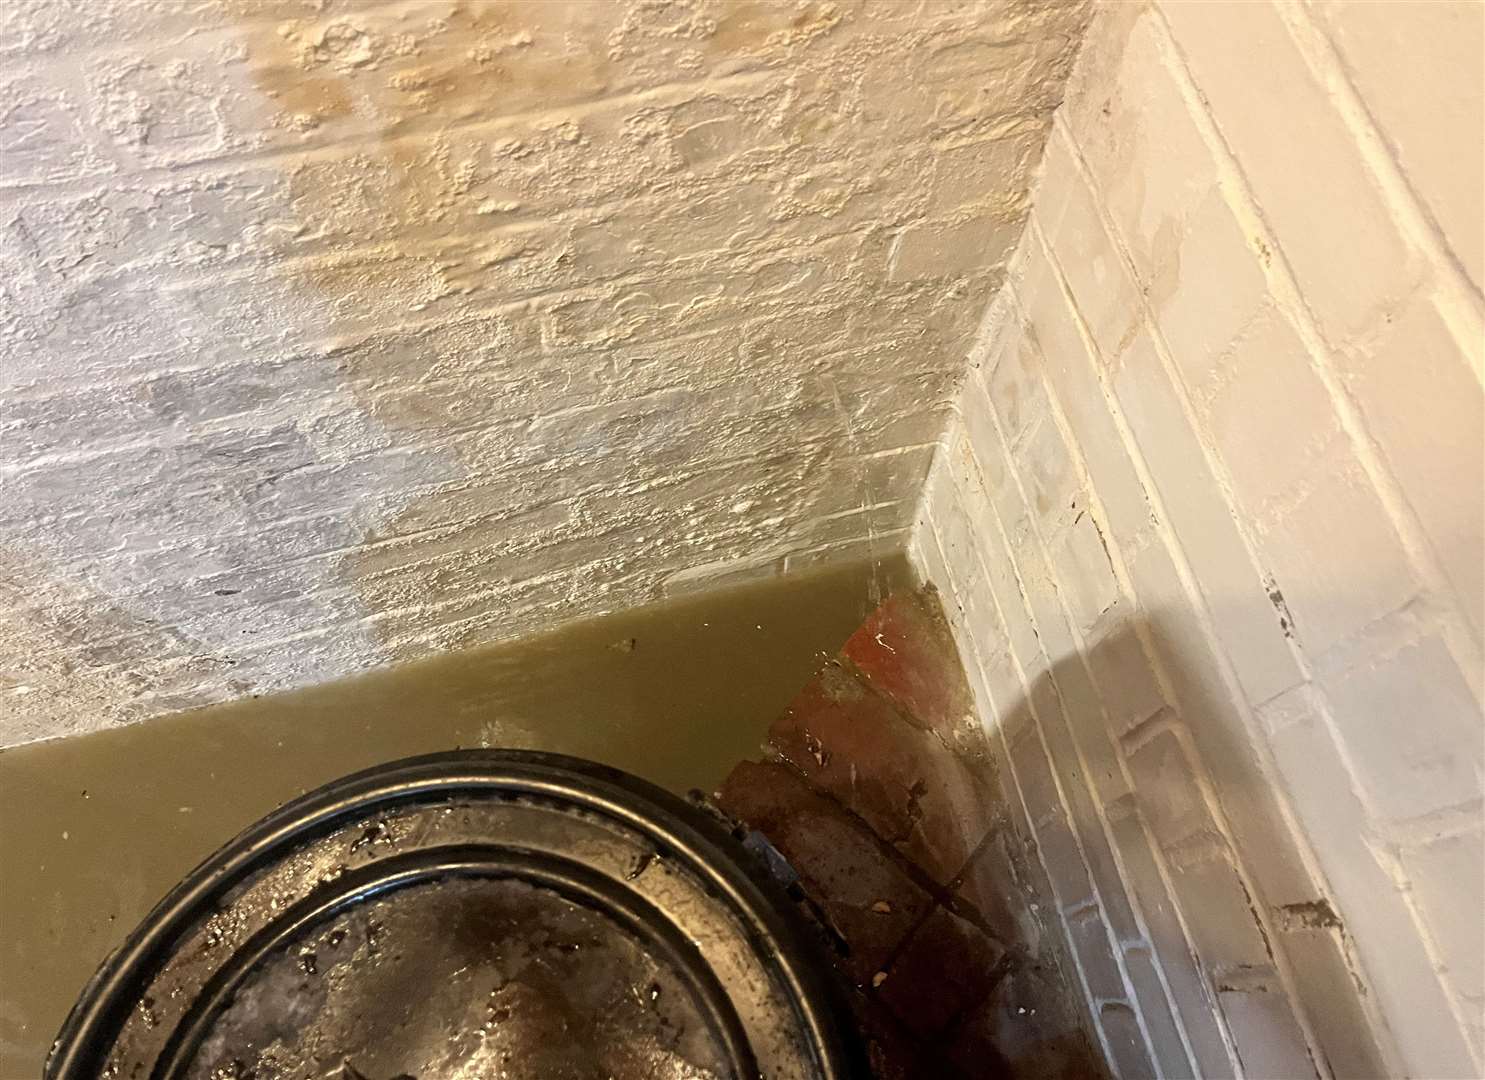 Water is coming through Mr Pantry’s walls in his basement